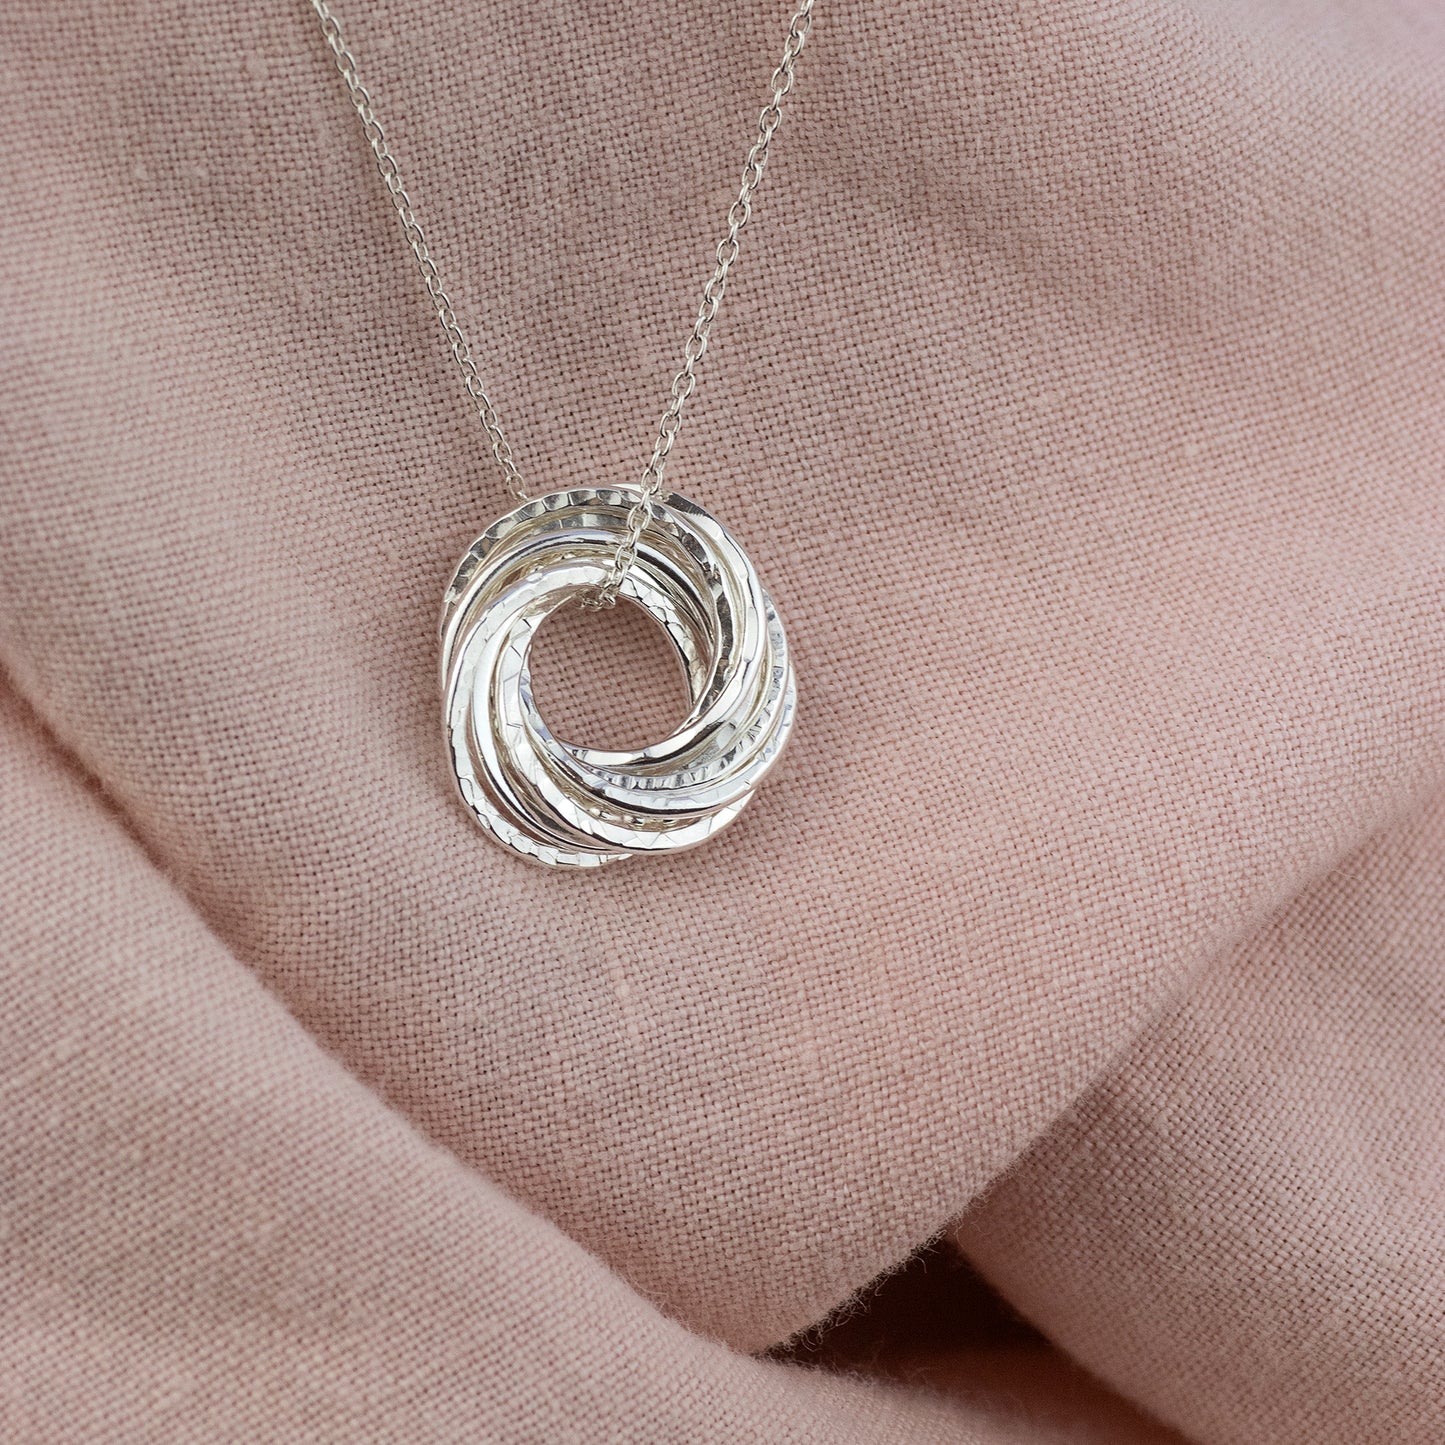 10th Anniversary Necklace - Petite Silver - The Original 10 Rings for 10 Years Necklace